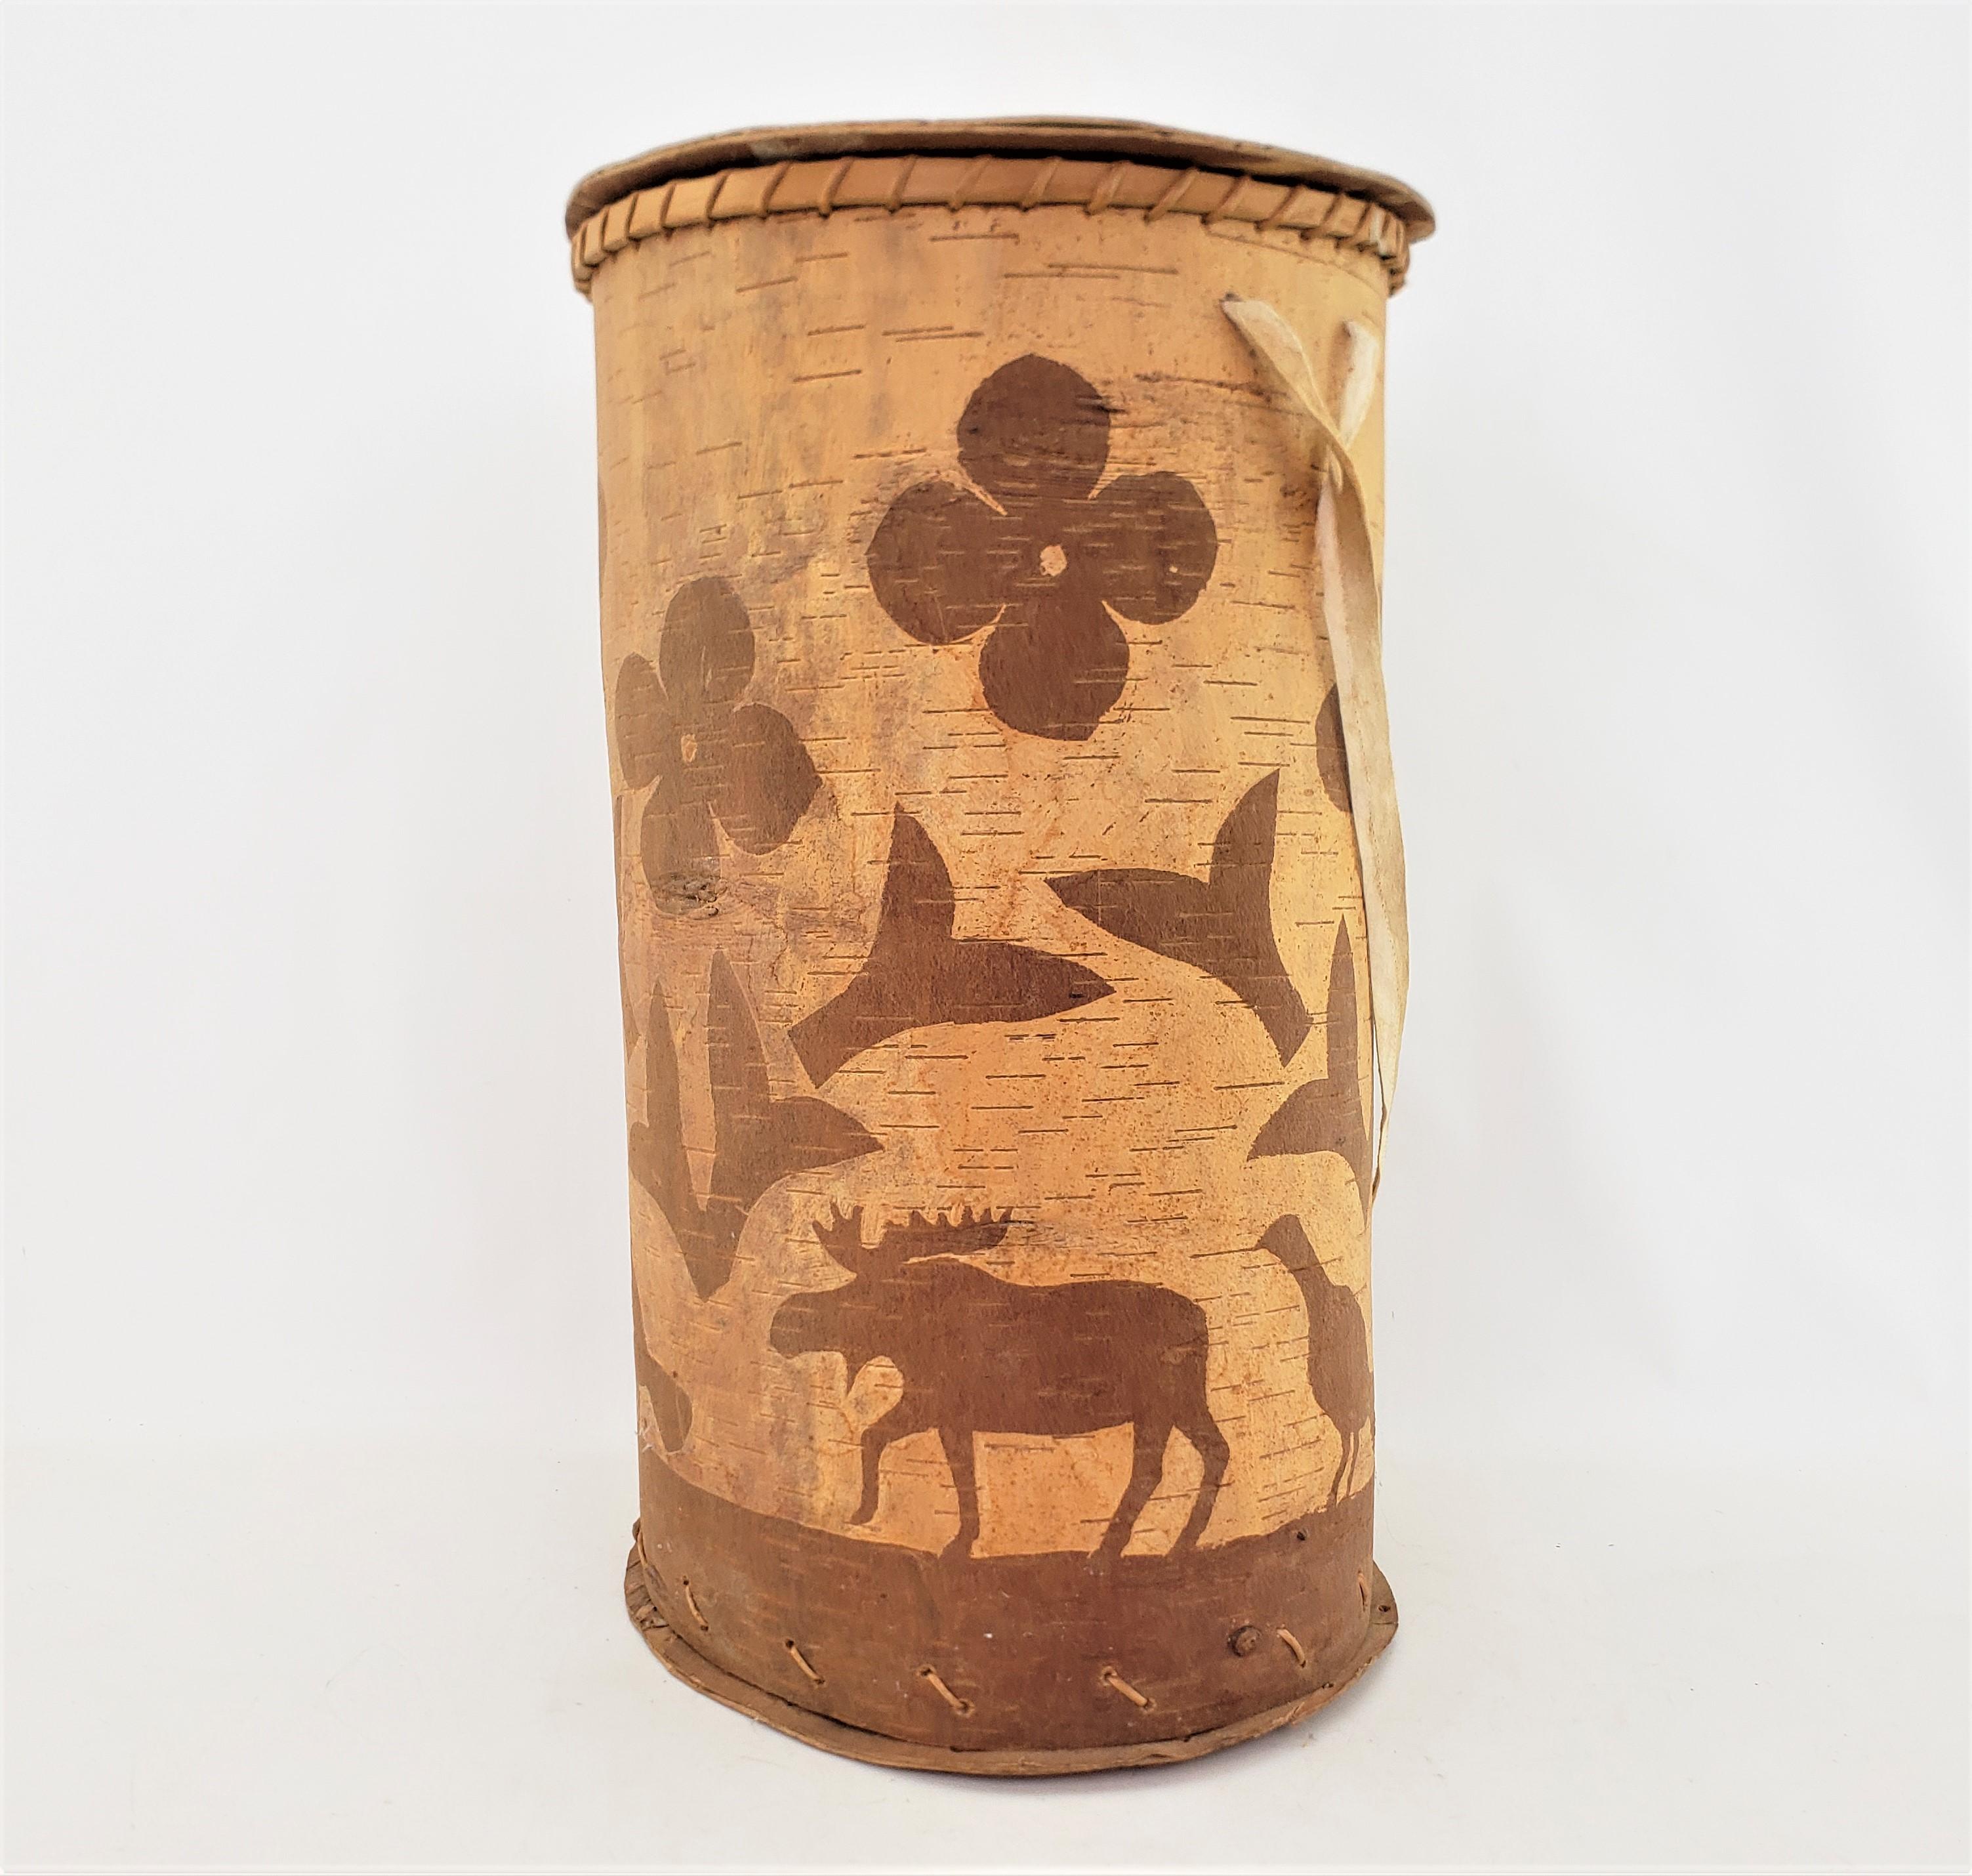 This large hand-crafted basket is unsigned, but presumed to have originated from Canada and date to approximately 1970 and done in the period indigenous Canadian style. This lidded basket is composed entirely of Birch bark which has been